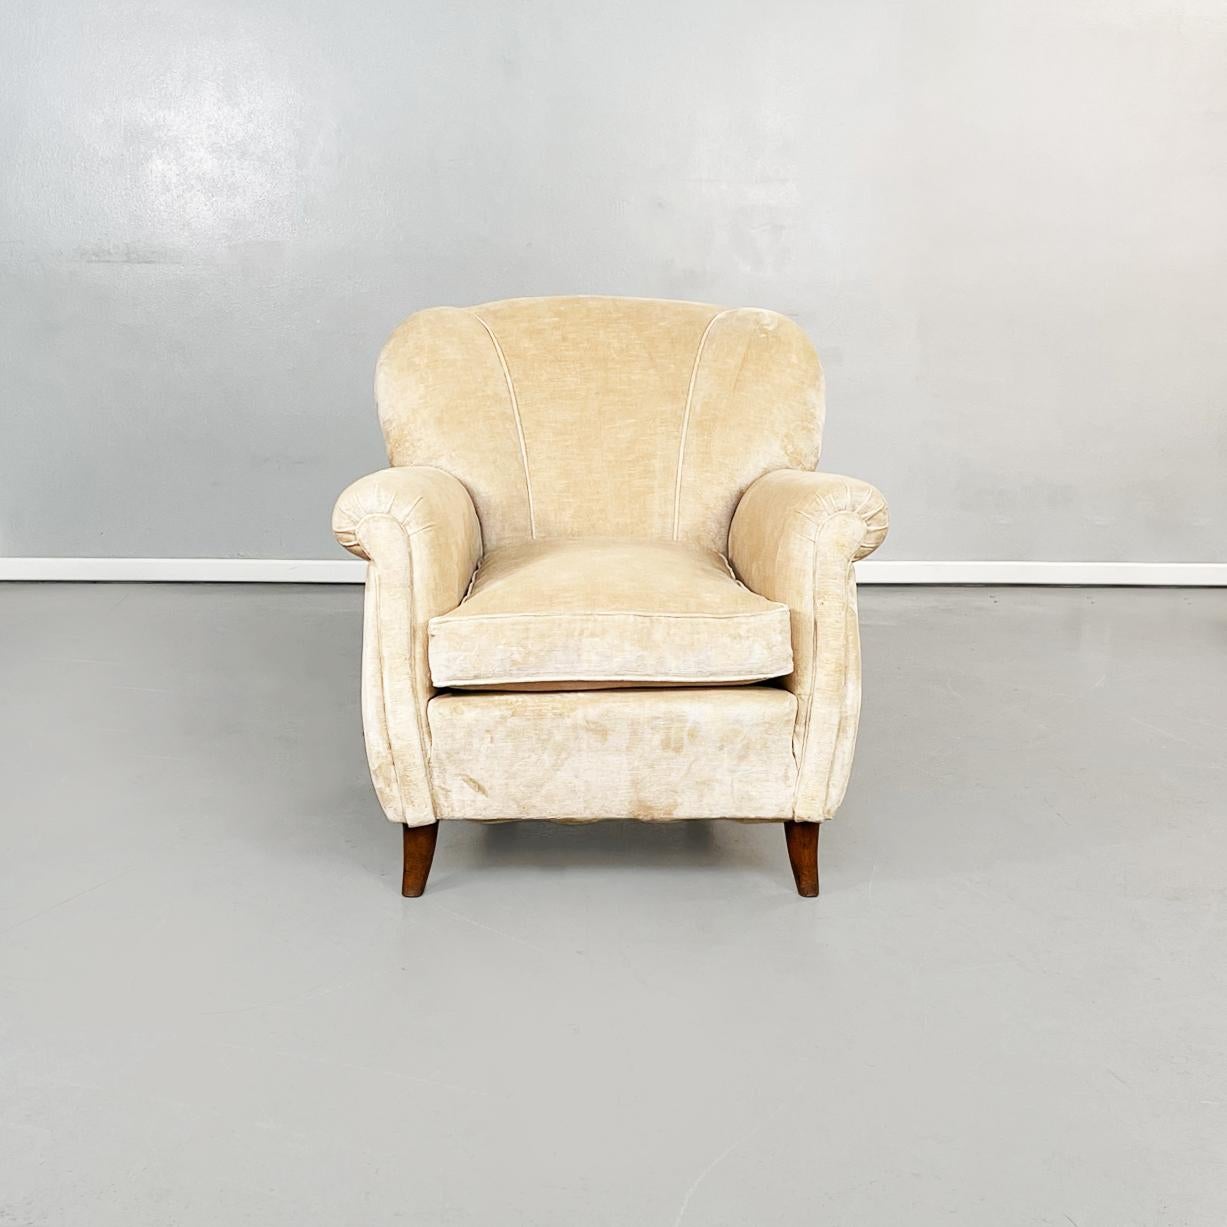 Italian Mid-Century Modern wooden armchairs in beige fabric, 1960s.
Pair of armchairs in beige fabric and wooden structure. The armchair has a cushion on the seat that follows the shape of the backrest. The back has several vertical seams that give